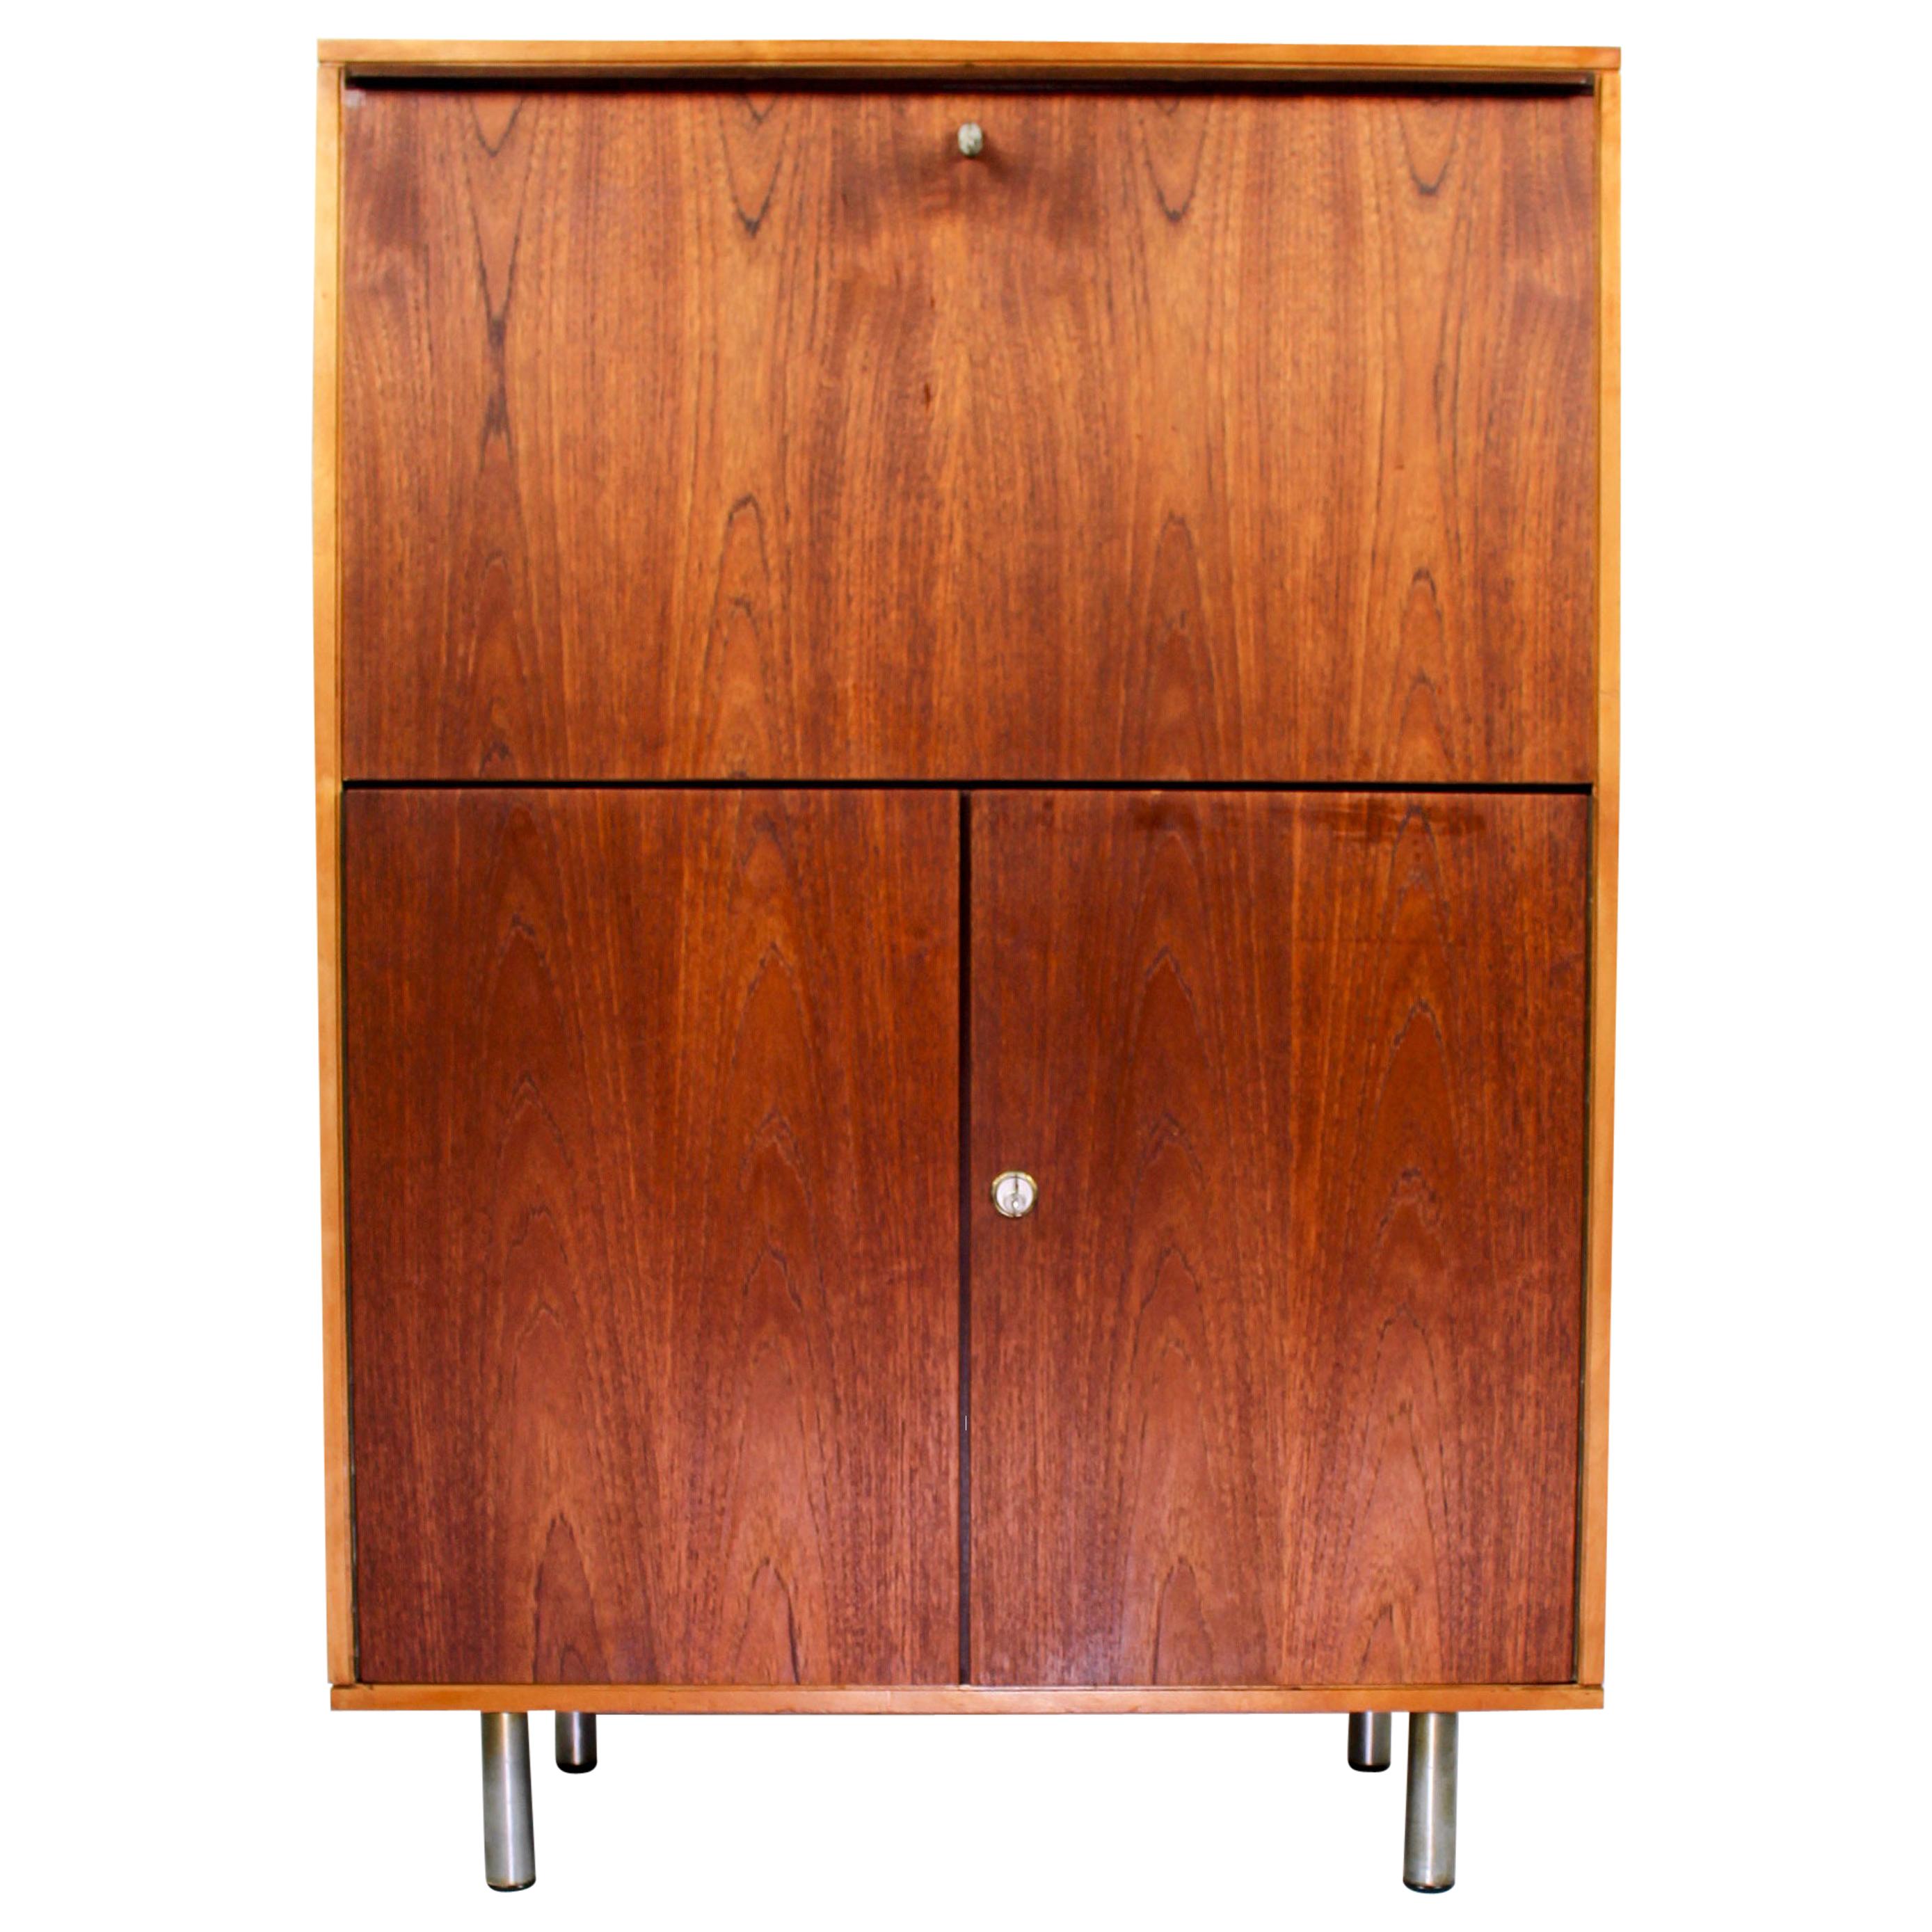 Vintage Midcentury CB07 cabinet by Cees Braakman for Pastoe, 1950s